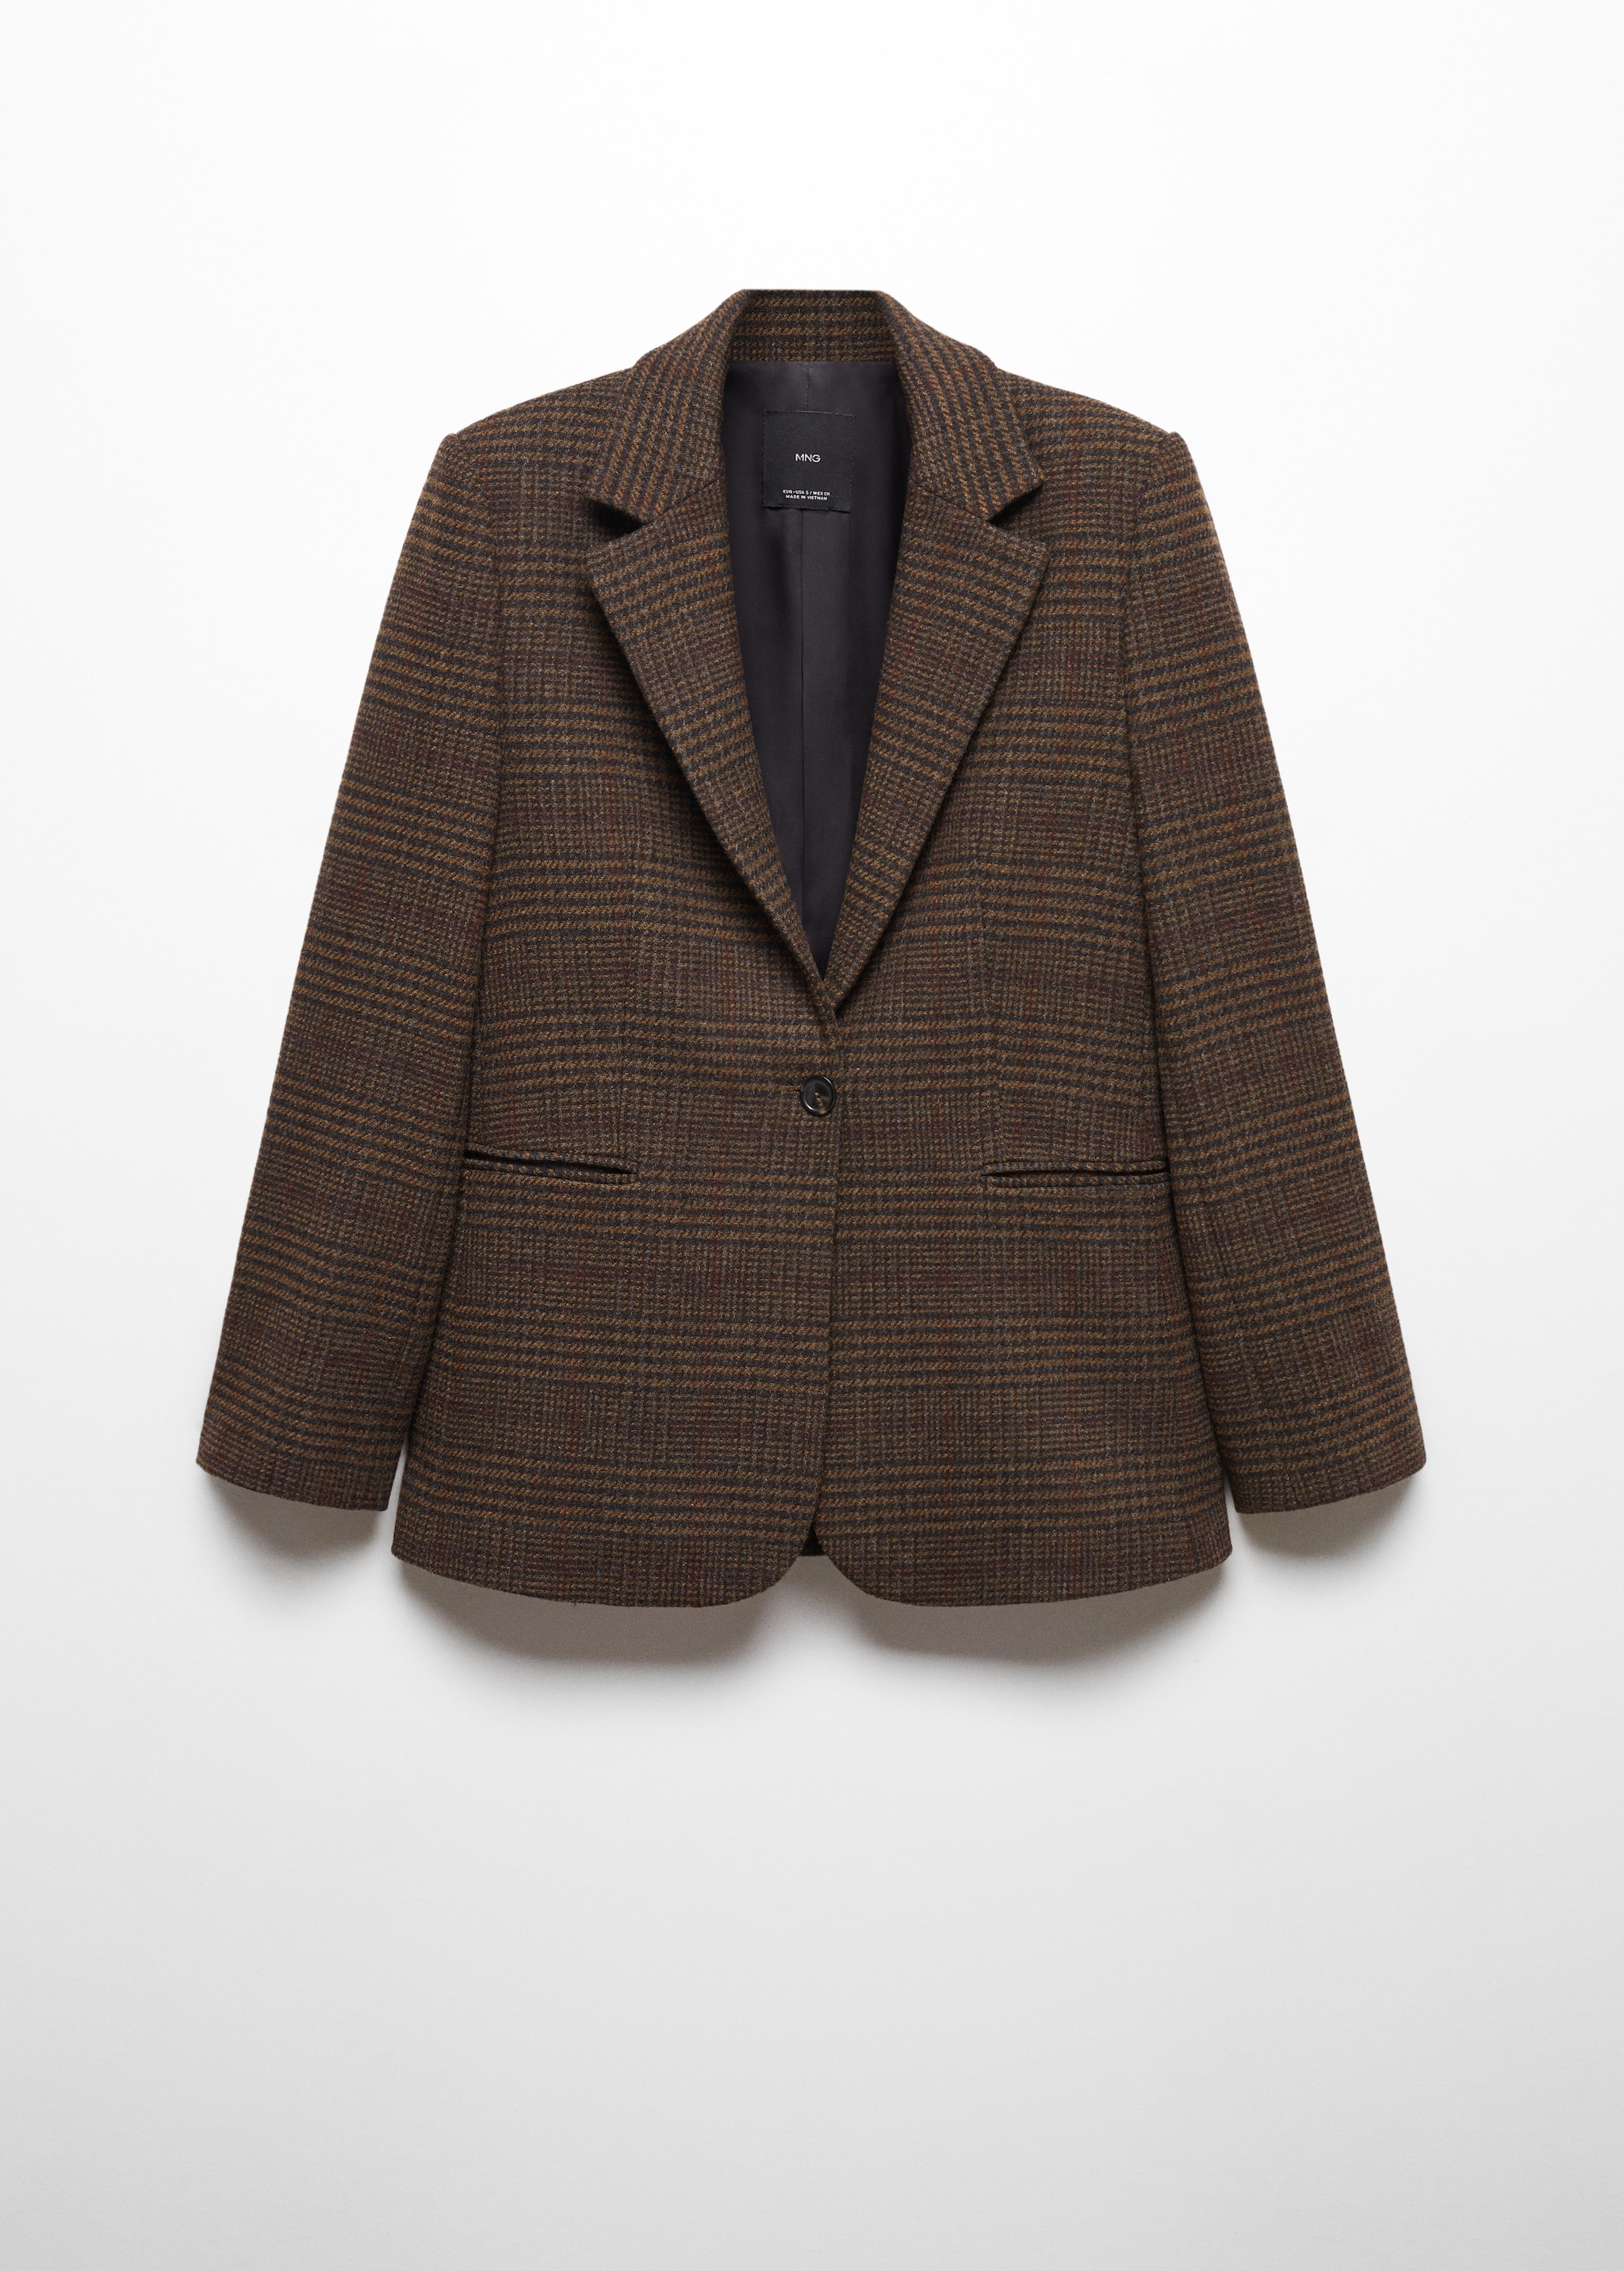 Straight check jacket - Article without model